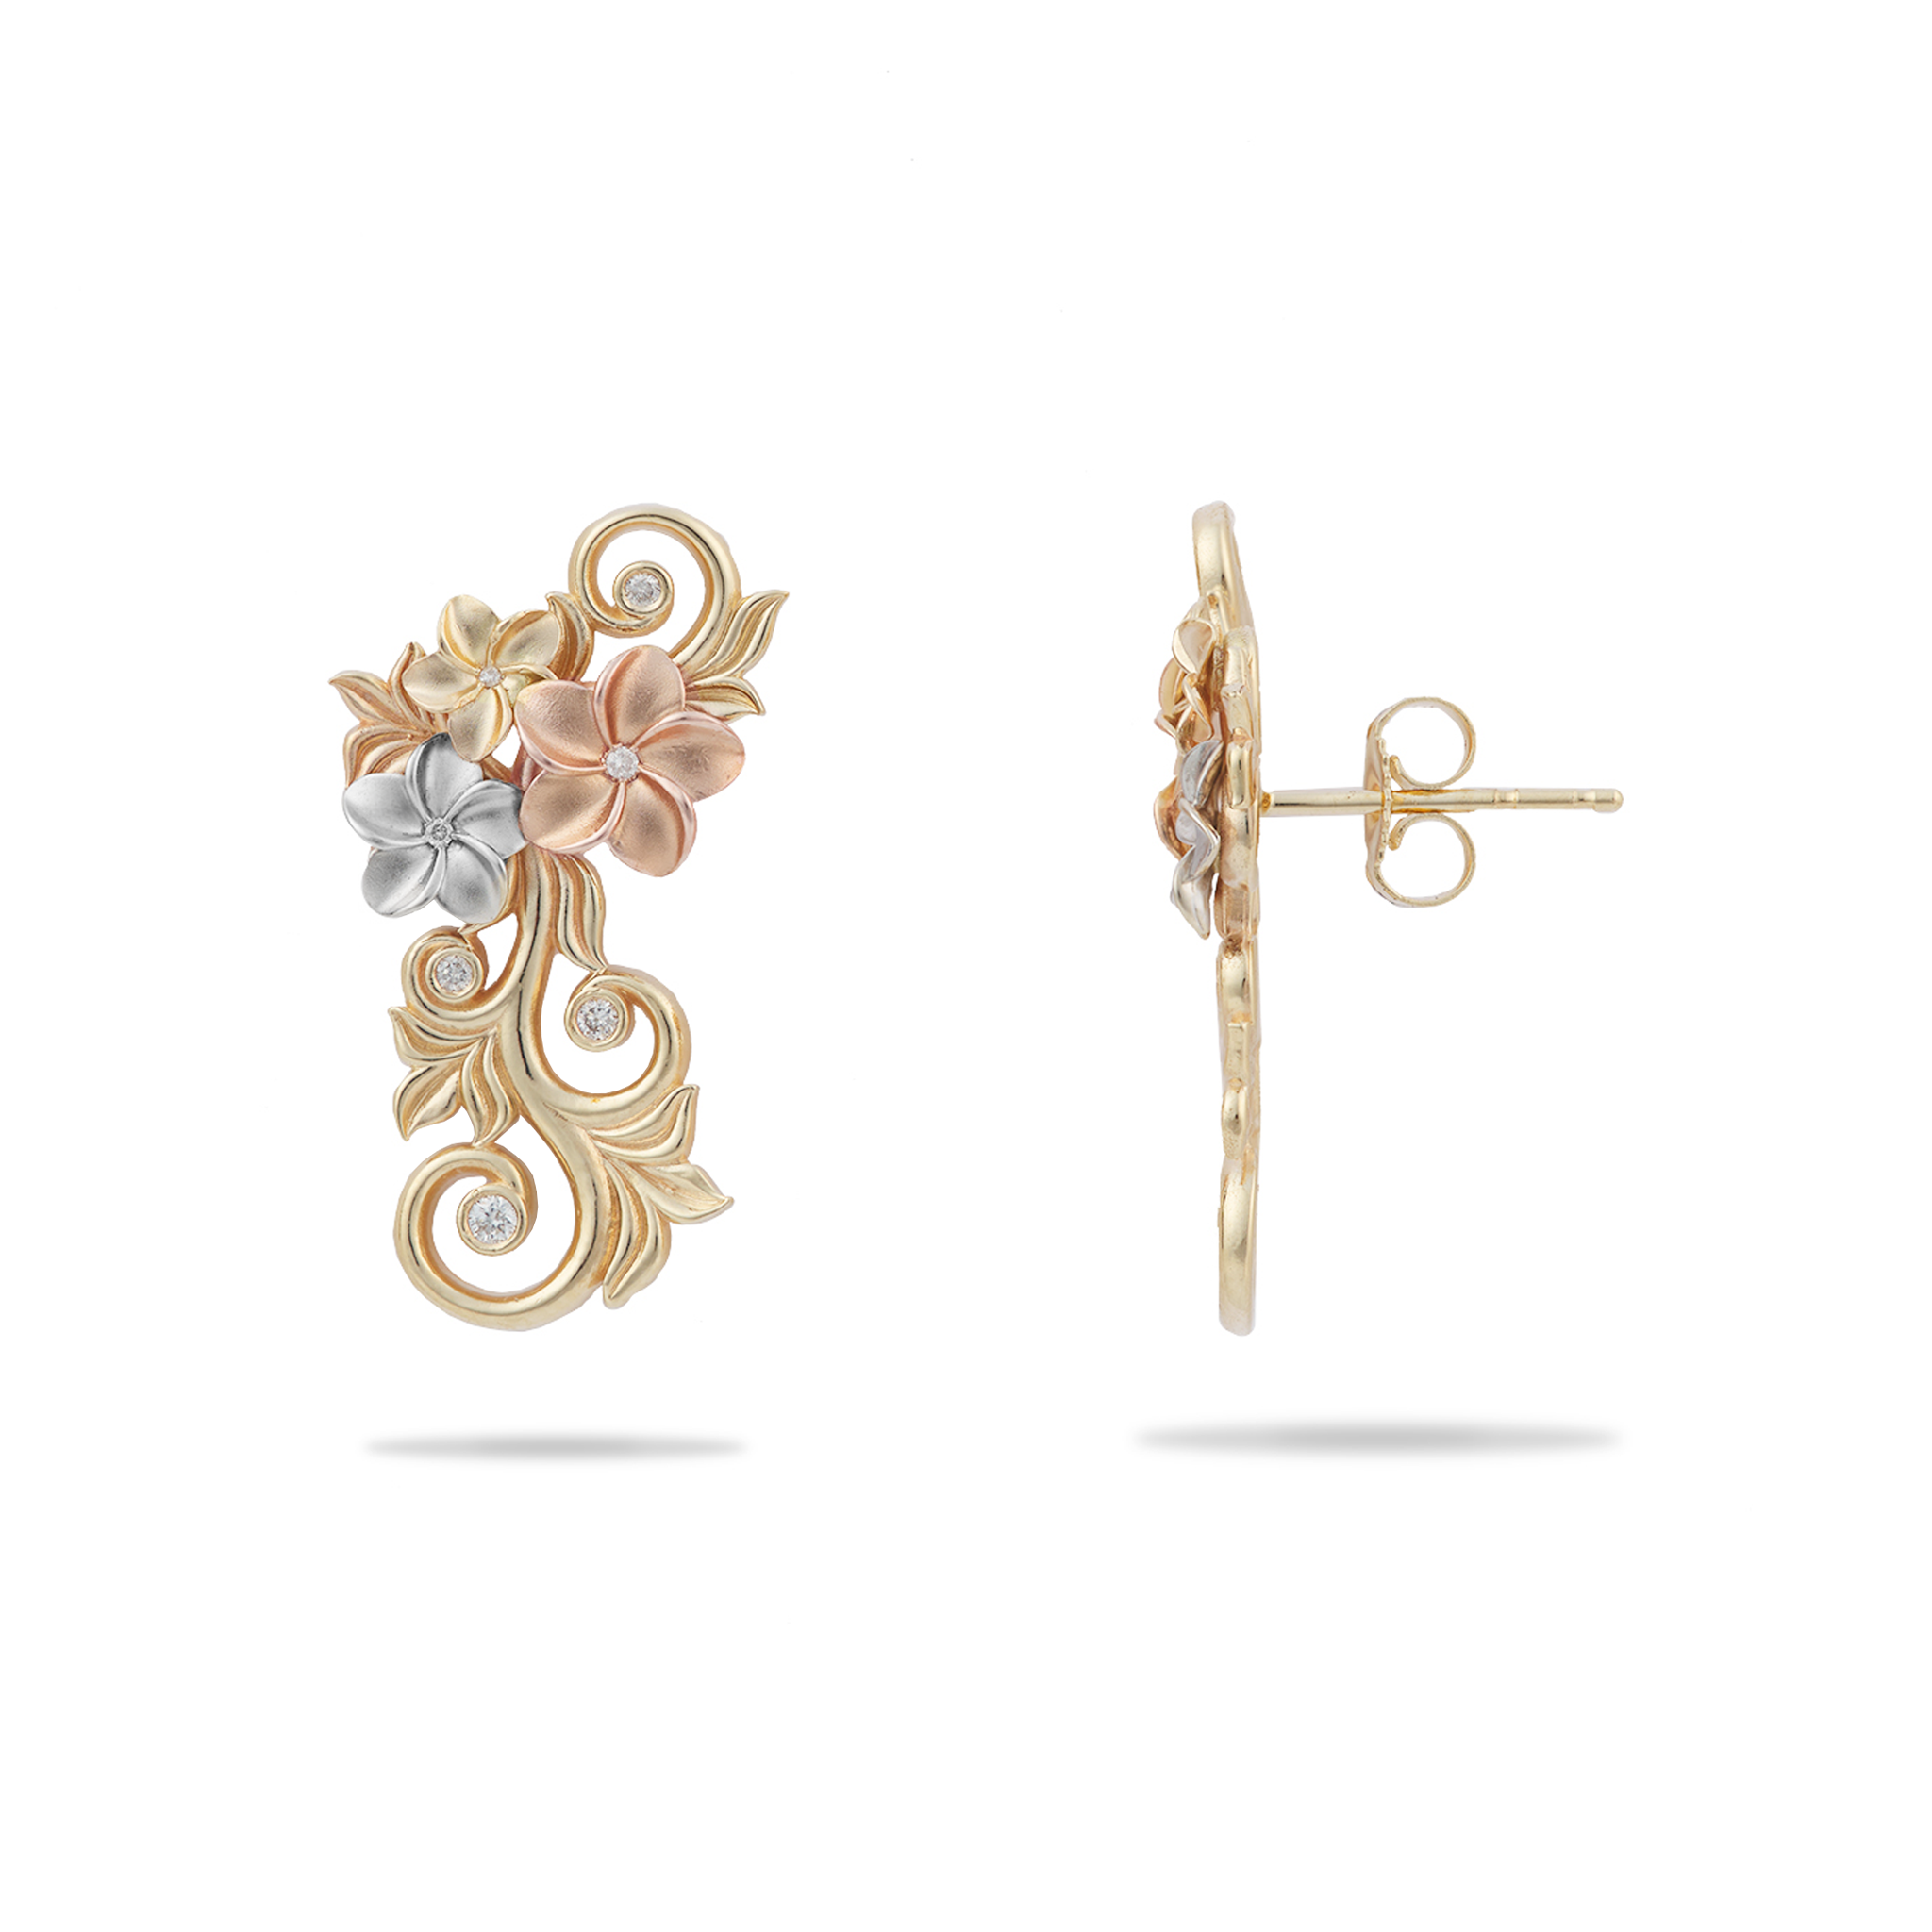 Living Heirloom Plumeria Earrings in Tri Color Gold with Diamonds - 25mm